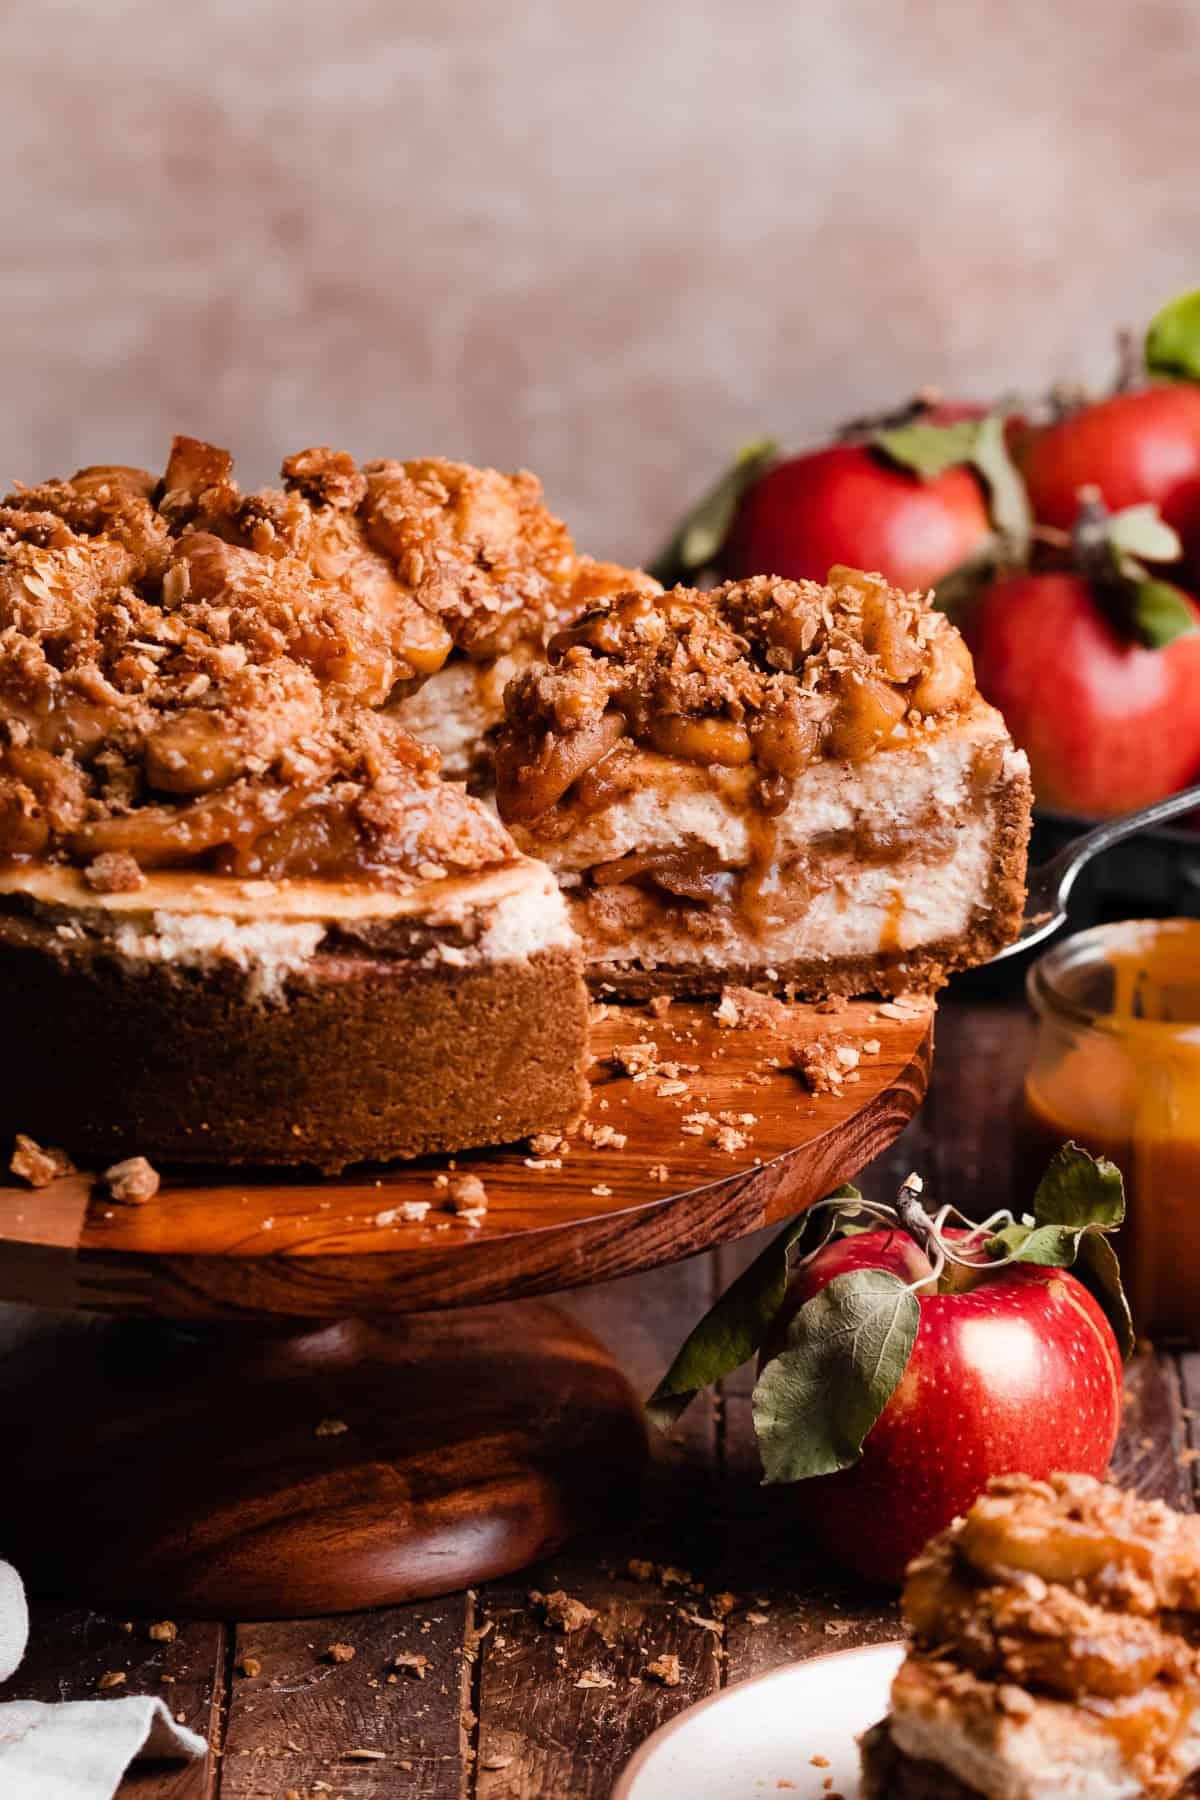 The sliced apple crumble cheesecake on a cake stand, with apple filling, crumble, and caramel on top.